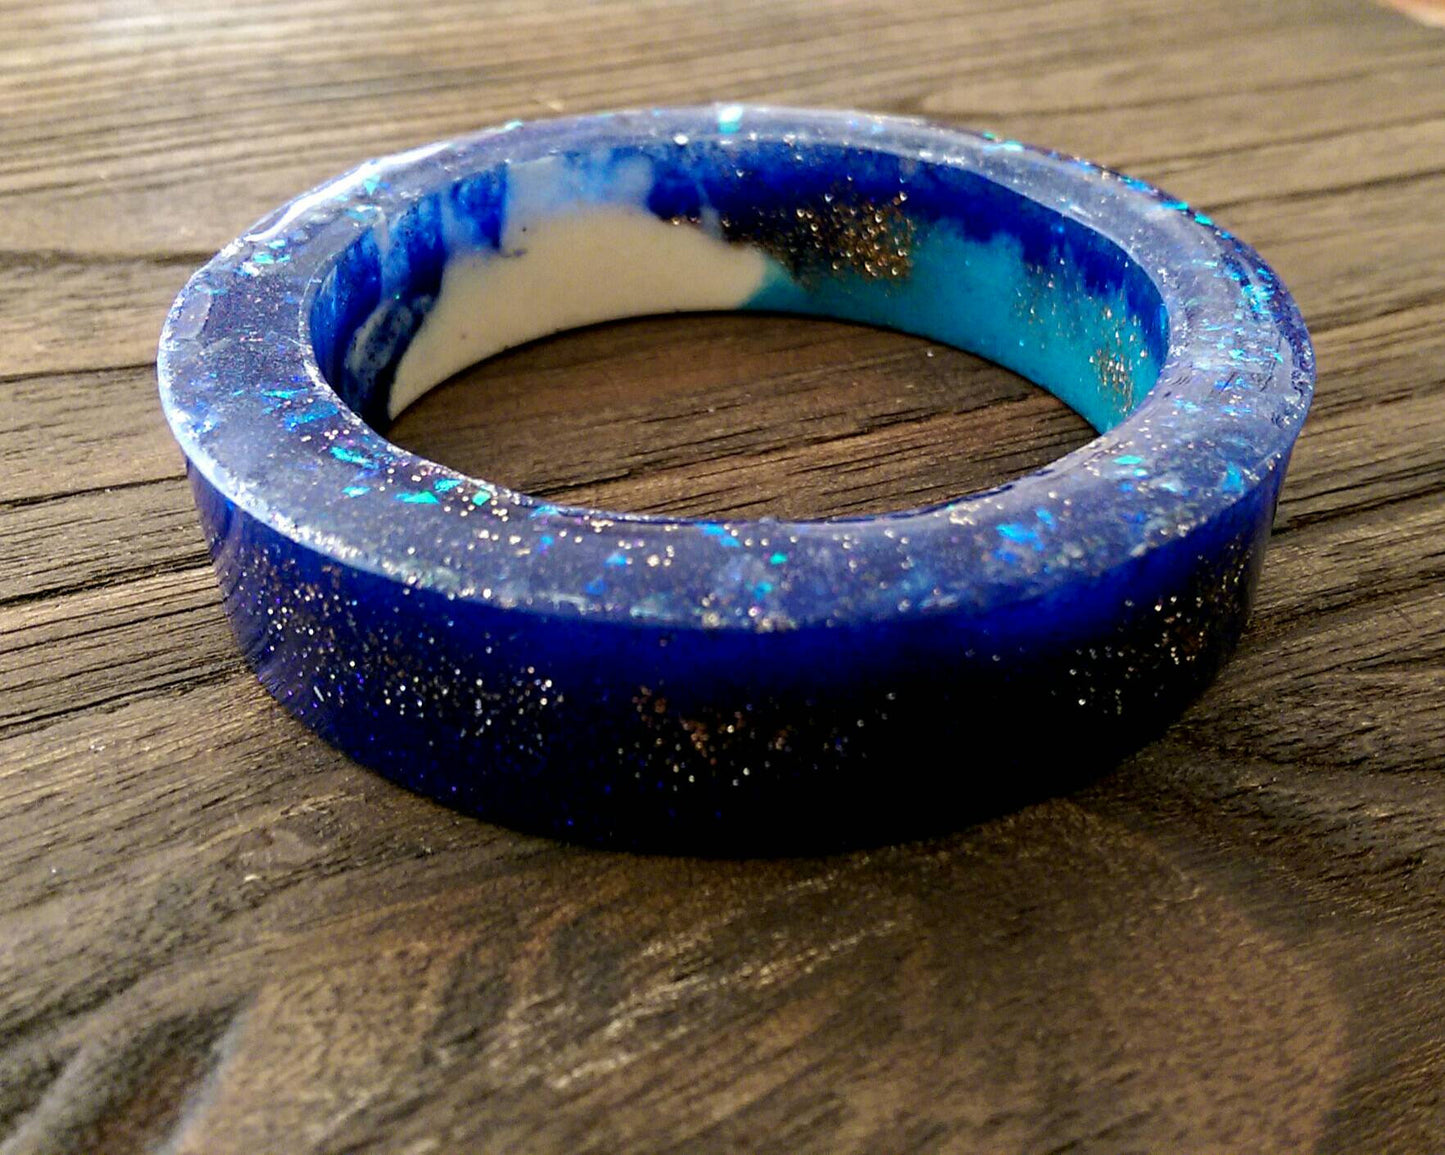 Galaxy Resin Bangle, One of a Kind Mix Blues, White & Glitter Resin Bangle Hand Made 62mm Diameter - Silver and Resin Designs